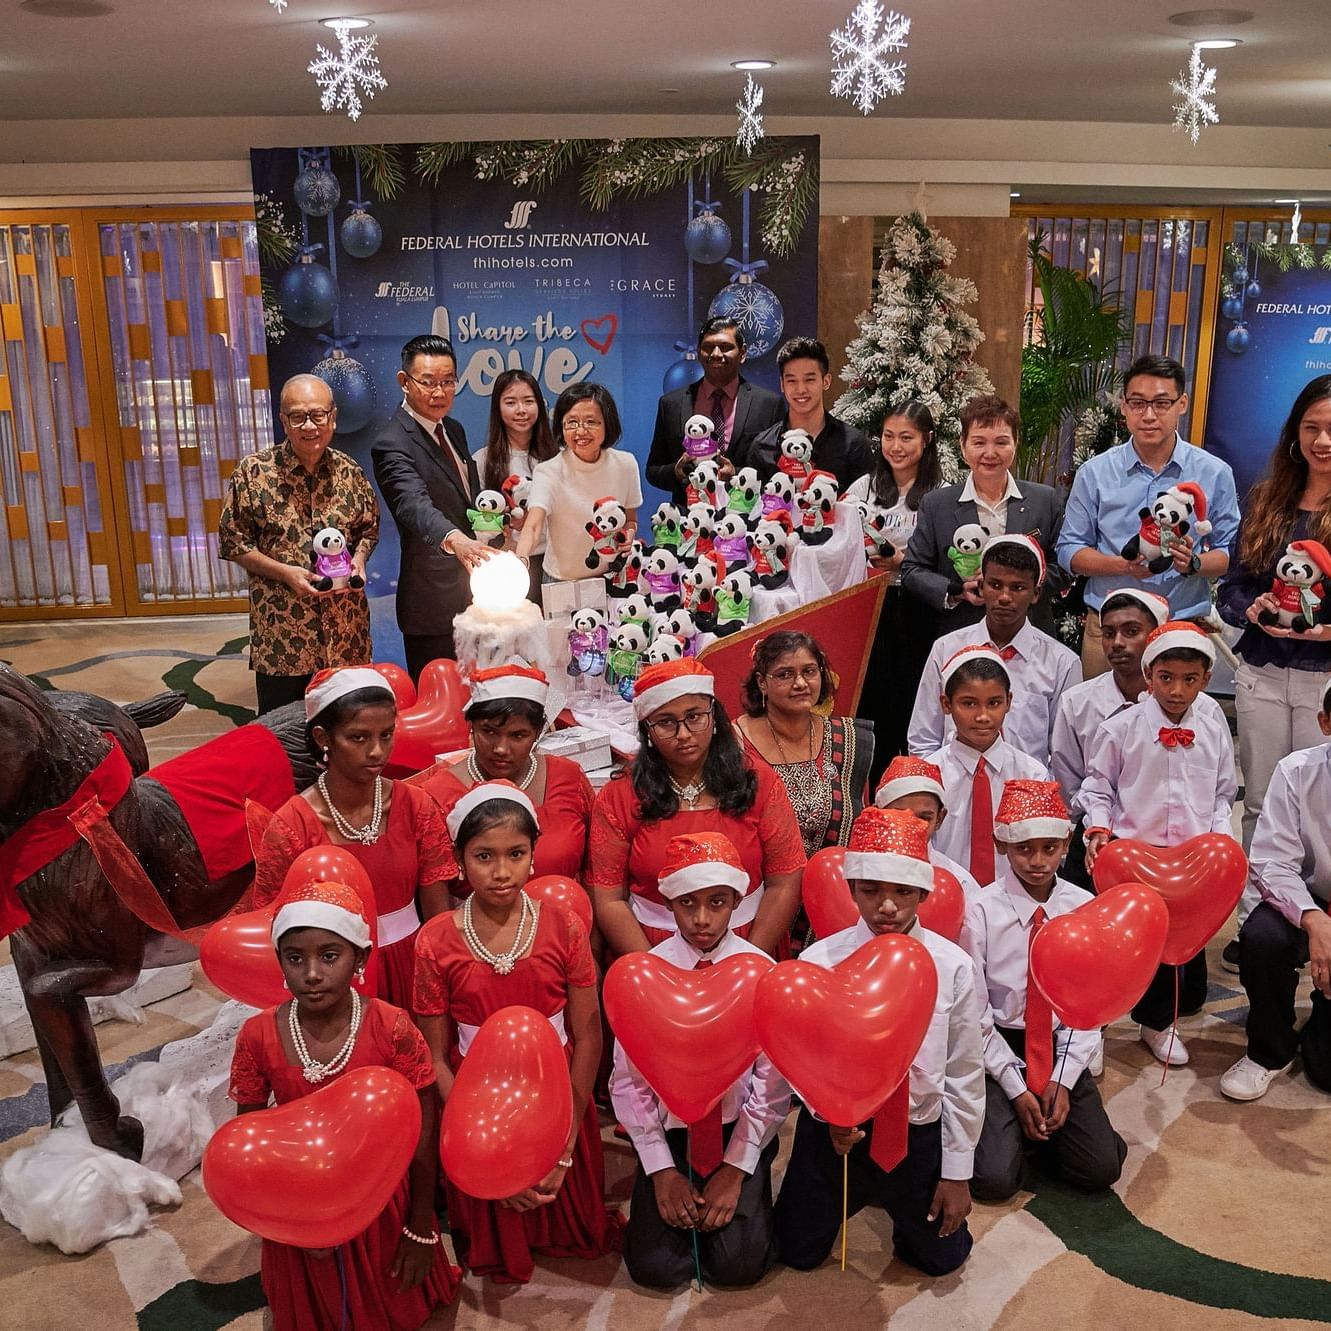 Children gathered for an event at Kuala Lumpur Hotels